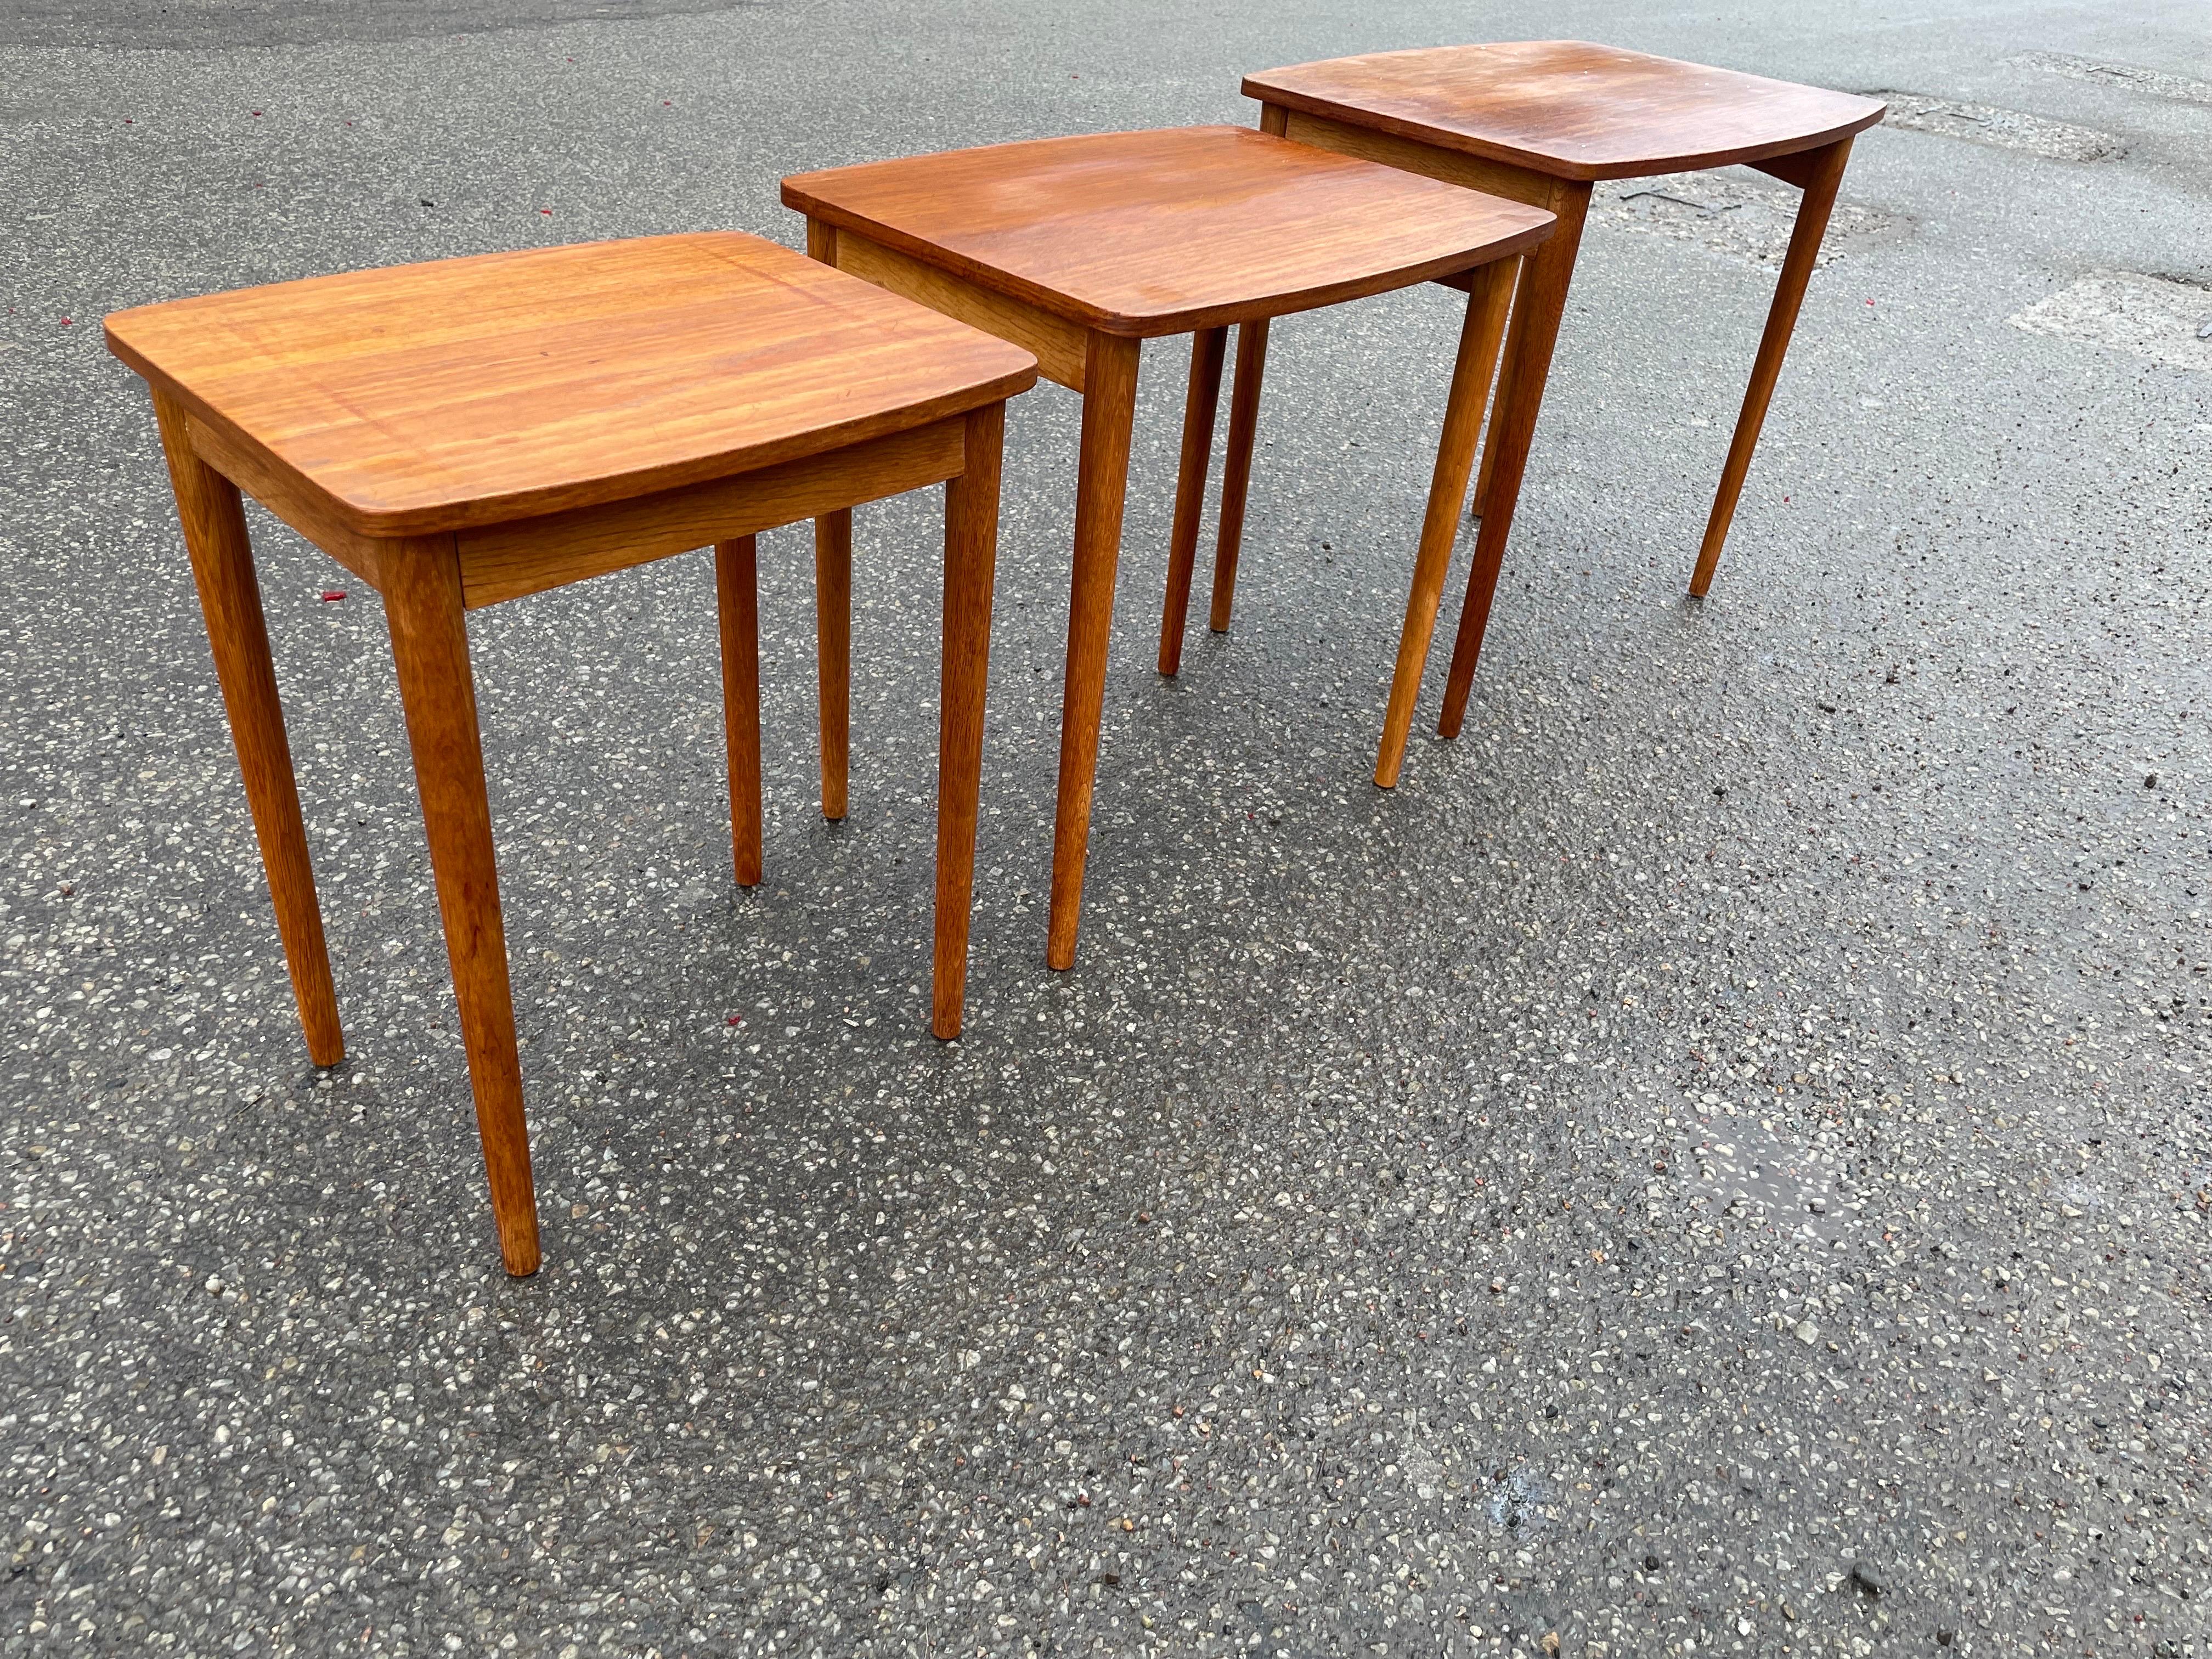 This set of teak nesting tables from the 1960s is the perfect addition to any mid-century modern enthusiast's home. The nested design allows for easy storage when not in use, while the high-quality teak wood construction ensures durability and a